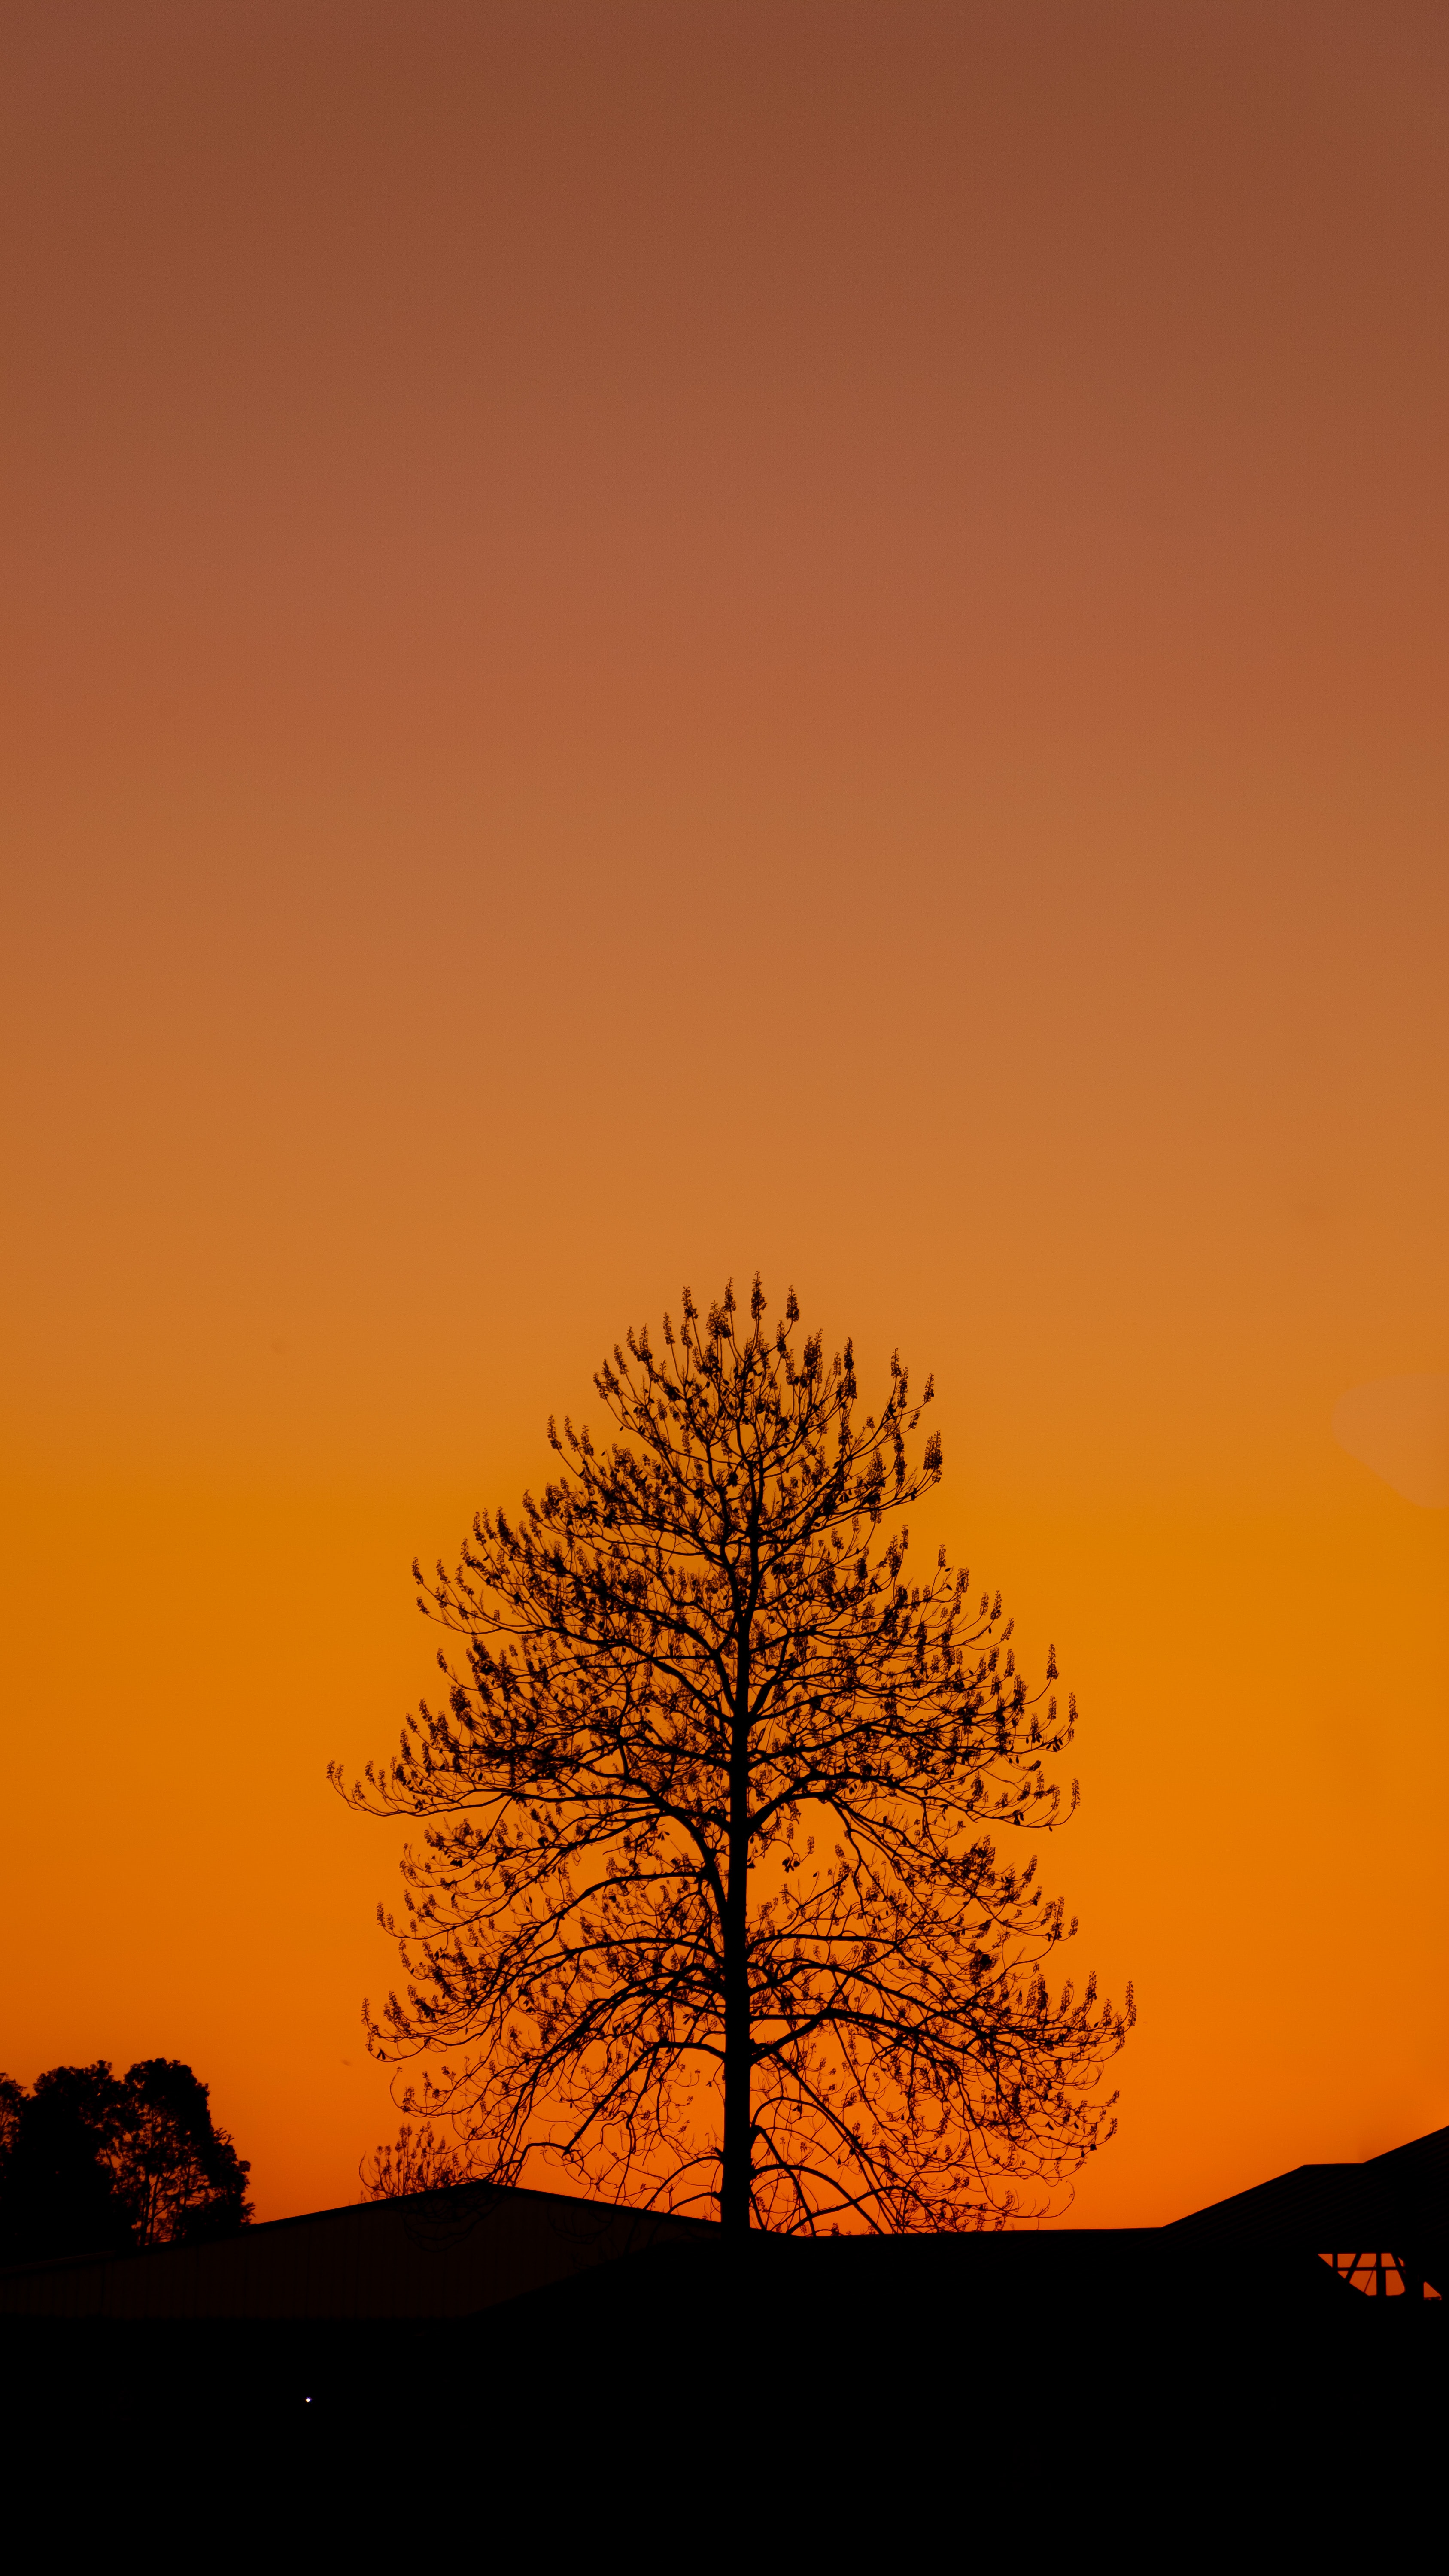 123217 download wallpaper sunset, dark, nature, silhouette, wood, tree screensavers and pictures for free